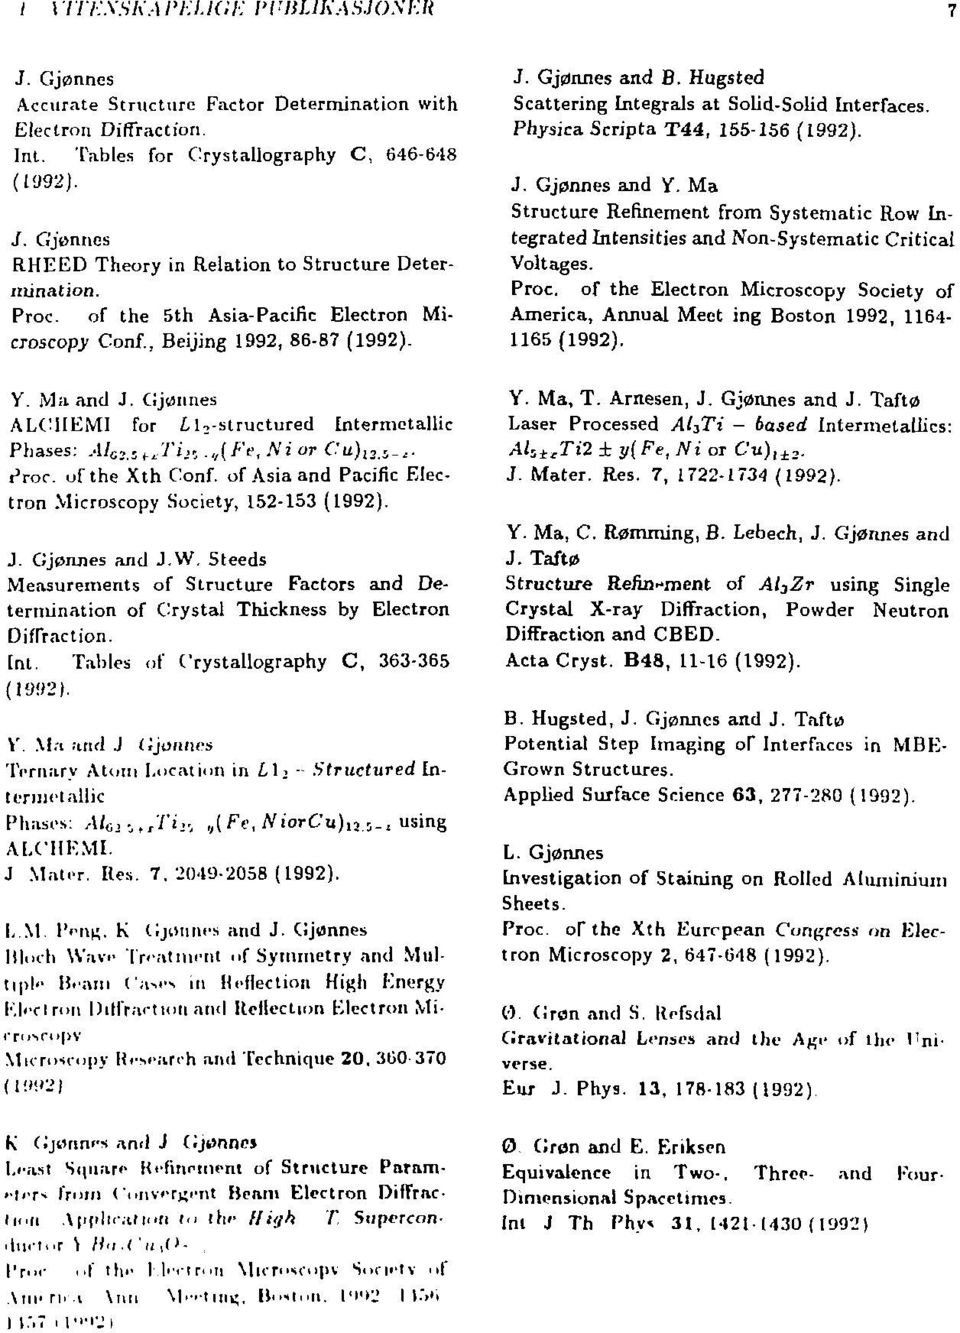 Ma Structure Refinement from Systematic Row Integrated Intensities and Non-Systematic Critical Voltages. Proc. of the Electron Microscopy Society of America, Annual Meet ing Boston 1992, 1164-1165 V.